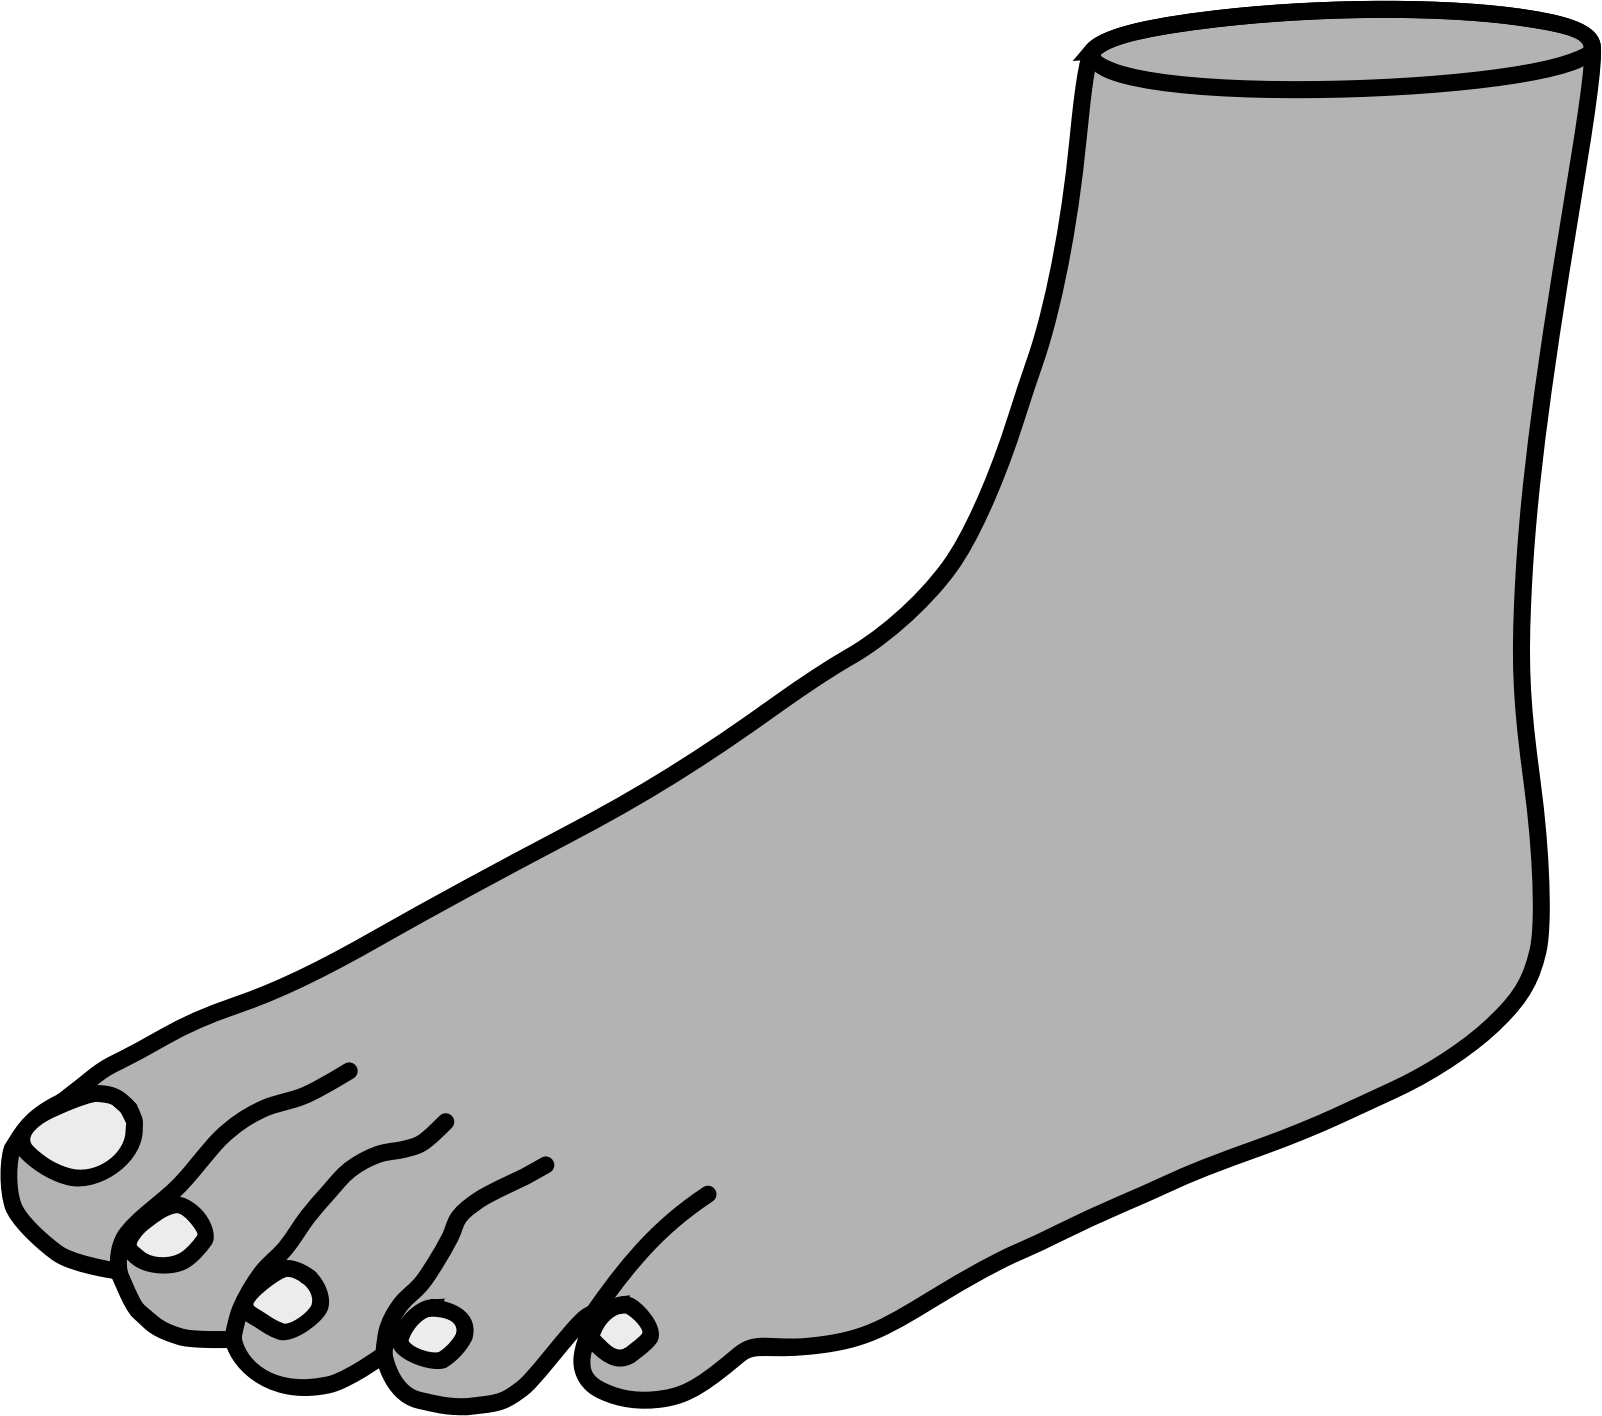 Foot clip art black and white free clipart images 4 - Clipartix